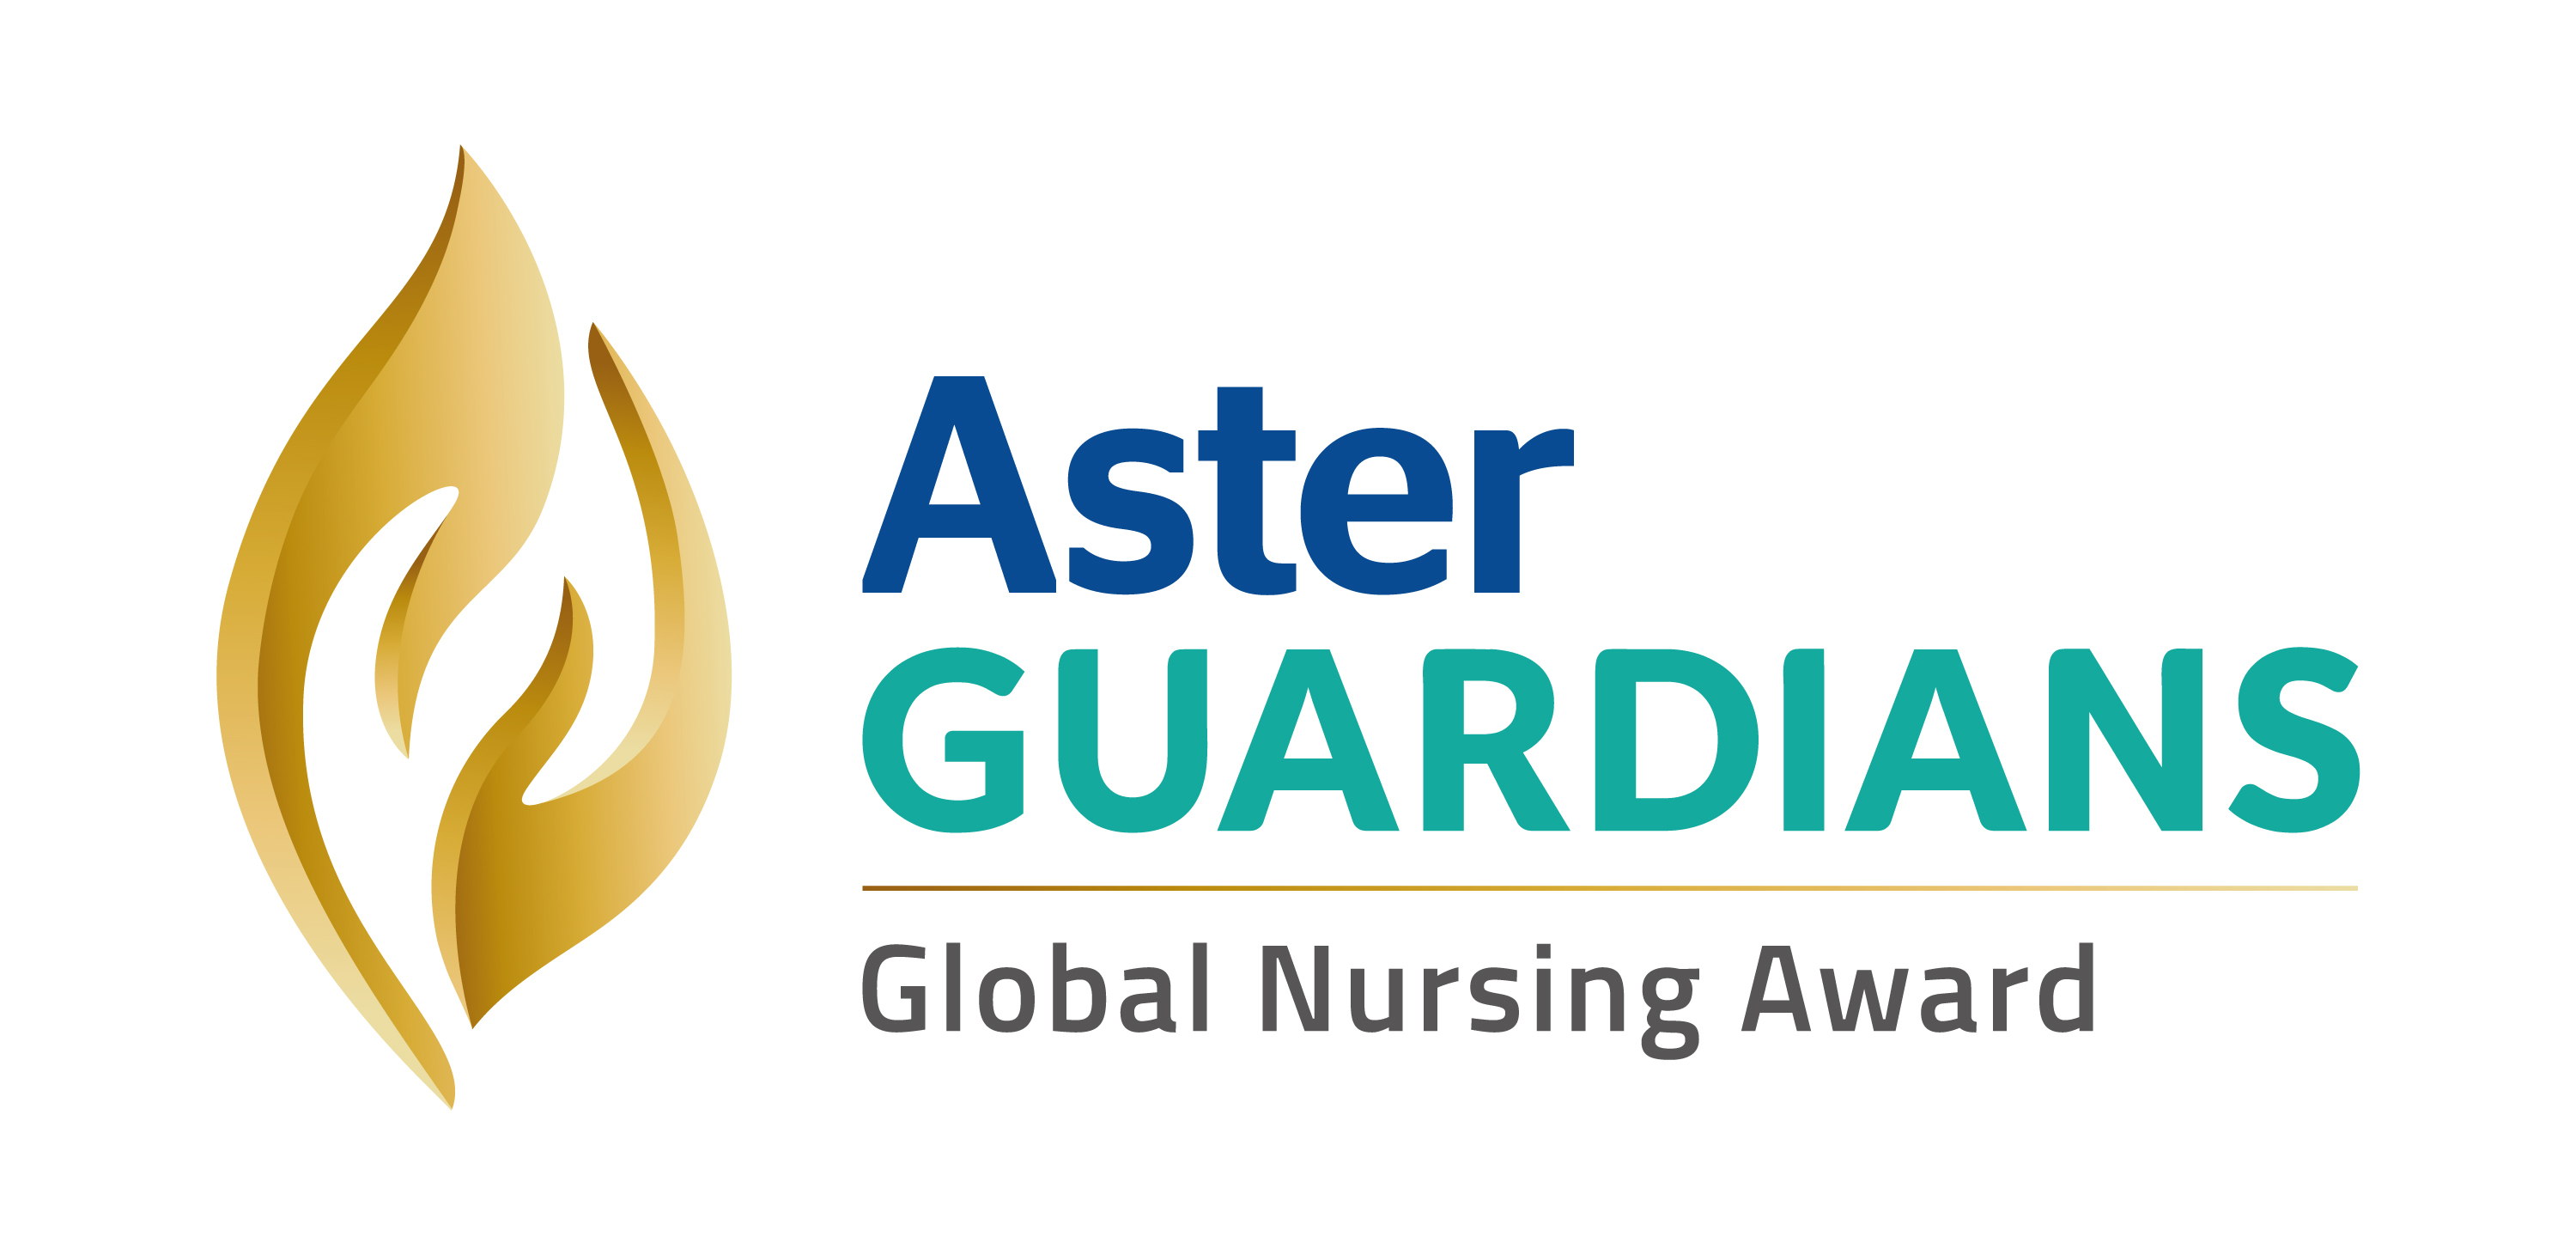 Aster Guardians Global Nursing Award worth US $250,000 now open for nominations from nurses worldwide
